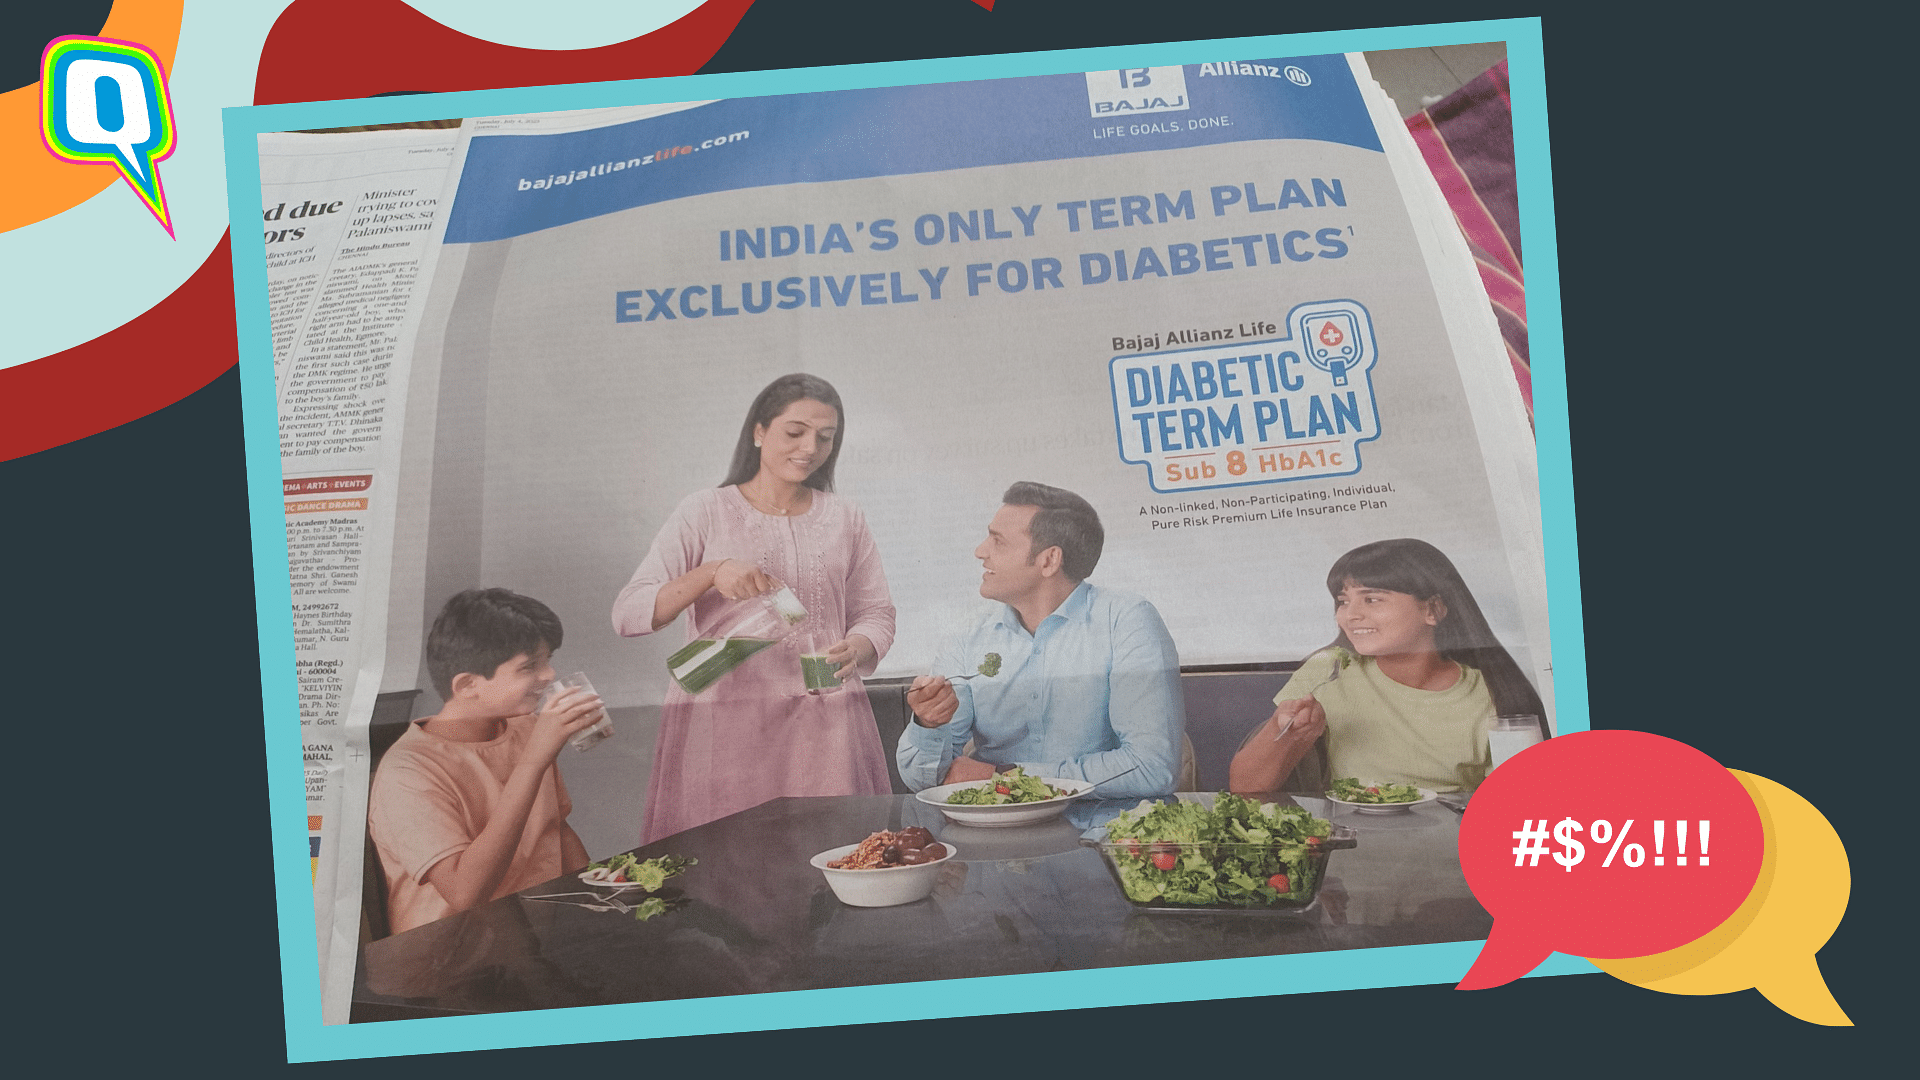 <div class="paragraphs"><p>'Some Things Don't Change': Insurance Ad Invites Flak For Promoting Gender Roles</p></div>